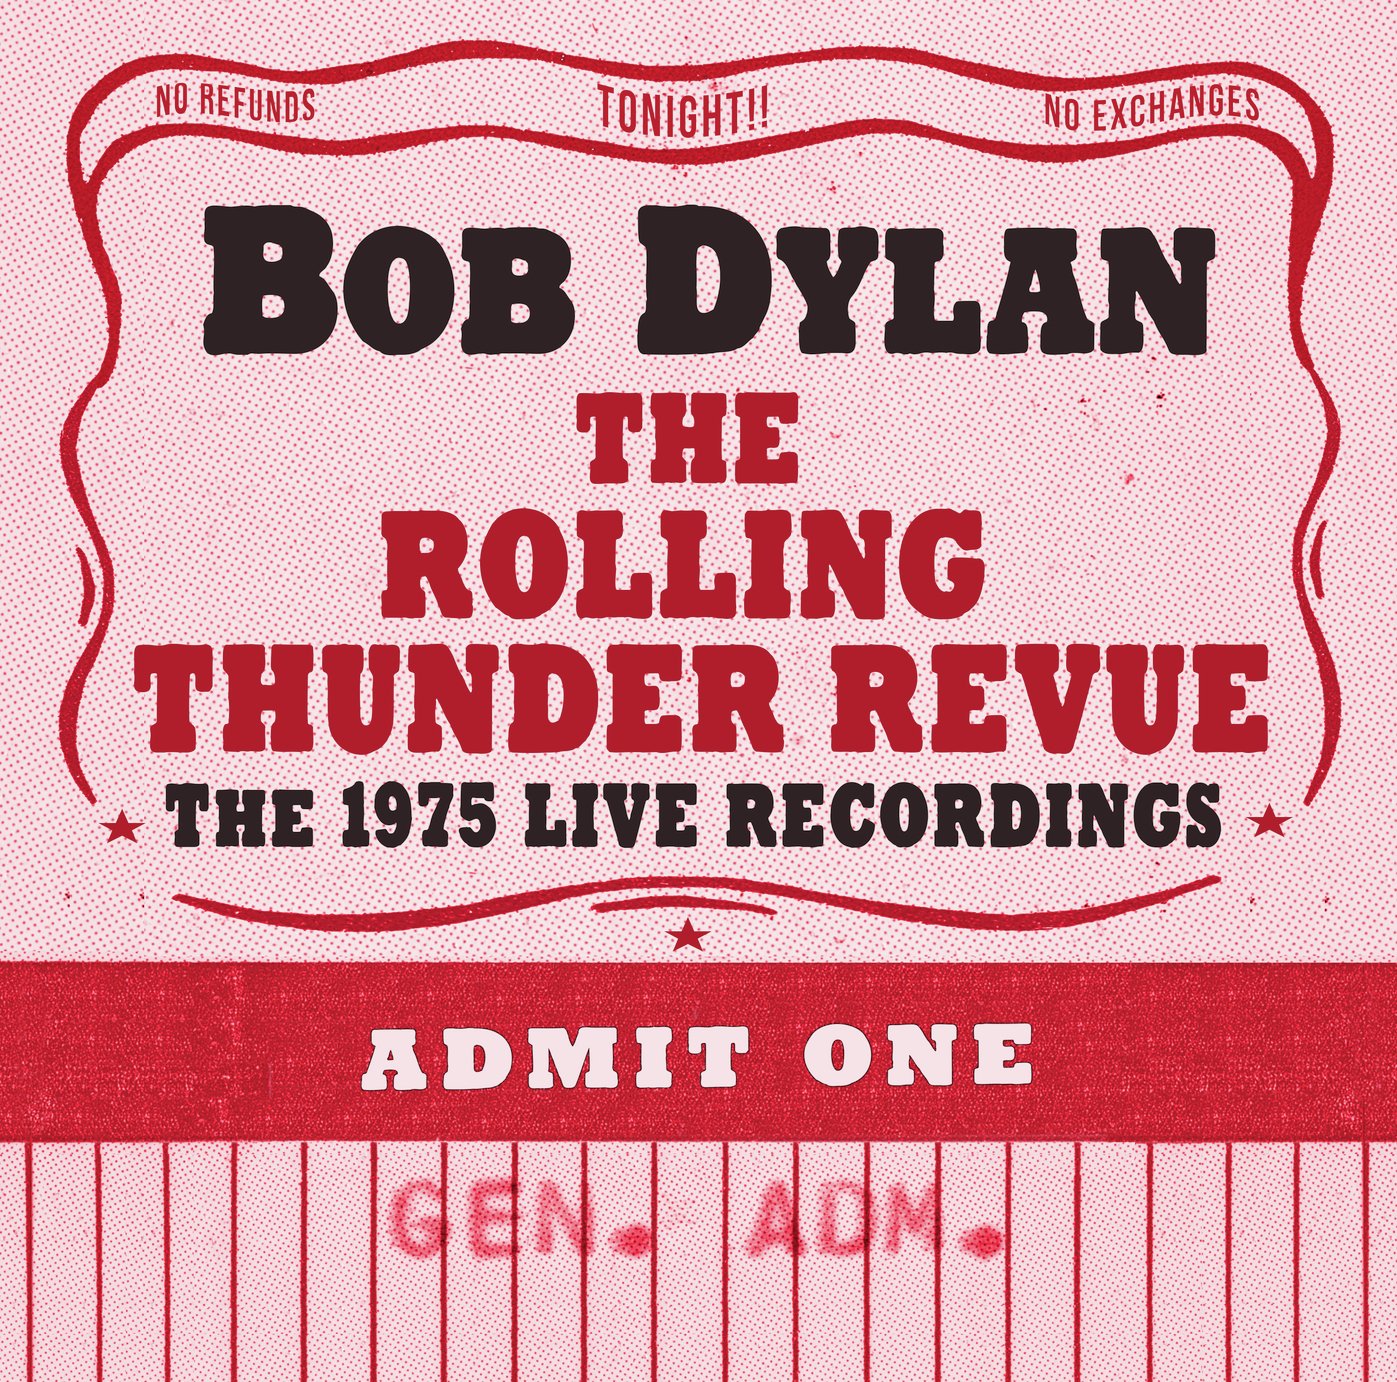 Bob Dylan The Rolling Thunder Review CD Collection